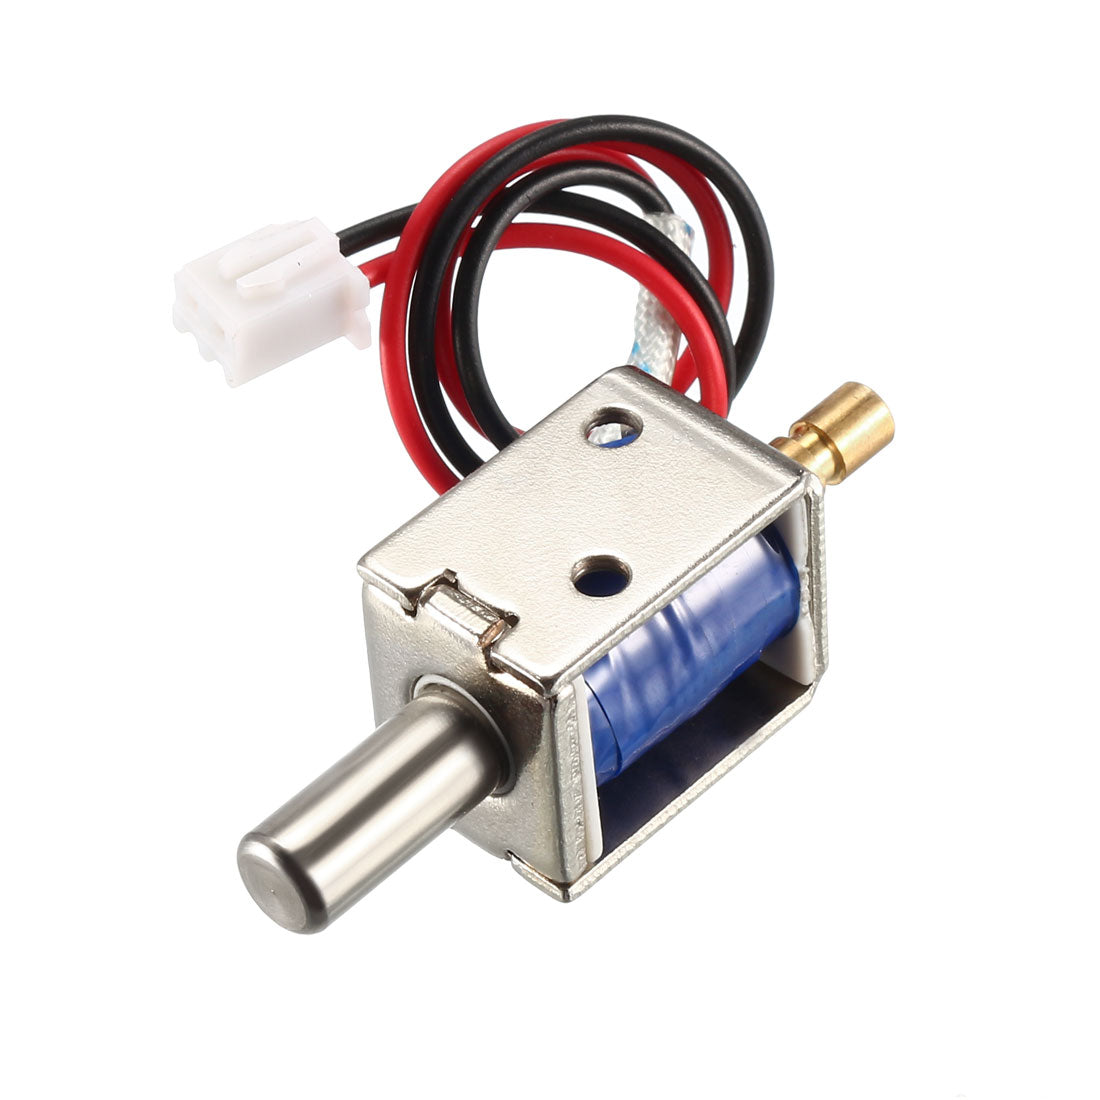 uxcell Uxcell DC 12V 0.43A 4mm Mini Electromagnetic Solenoid Lock Push Pull Type for Electirc Door Lock